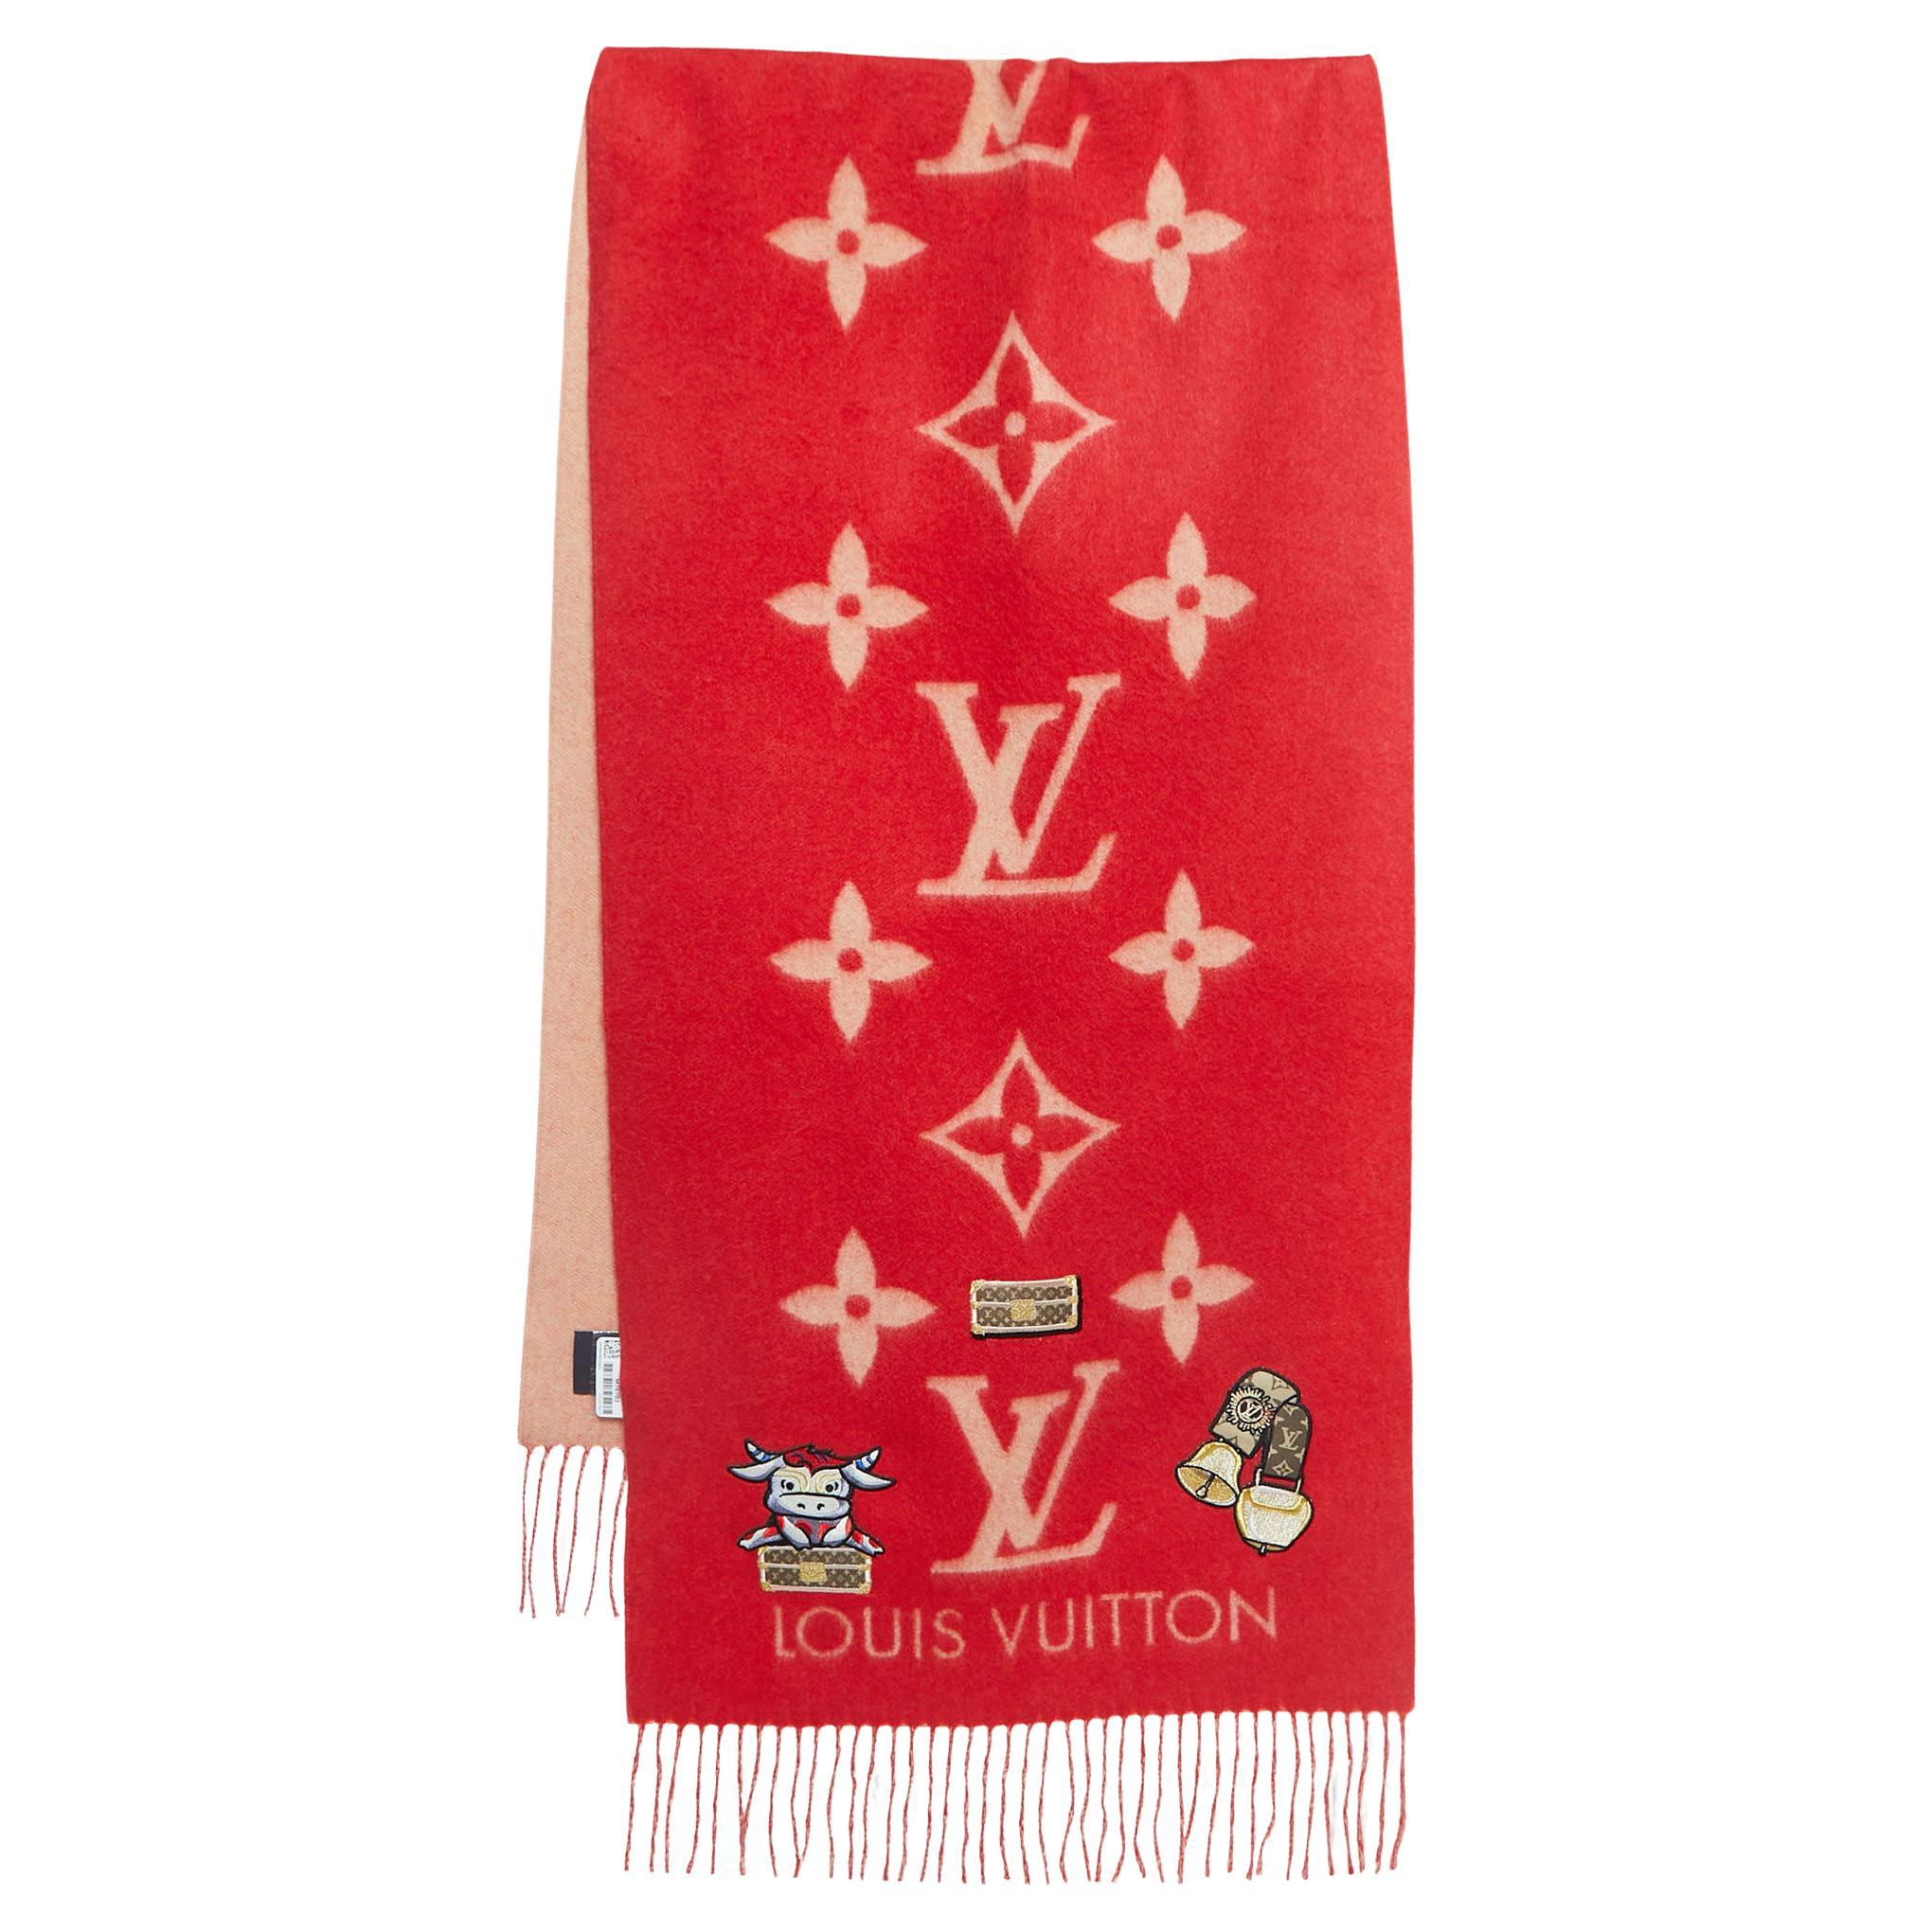 Where are Louis Vuitton silk scarves made?